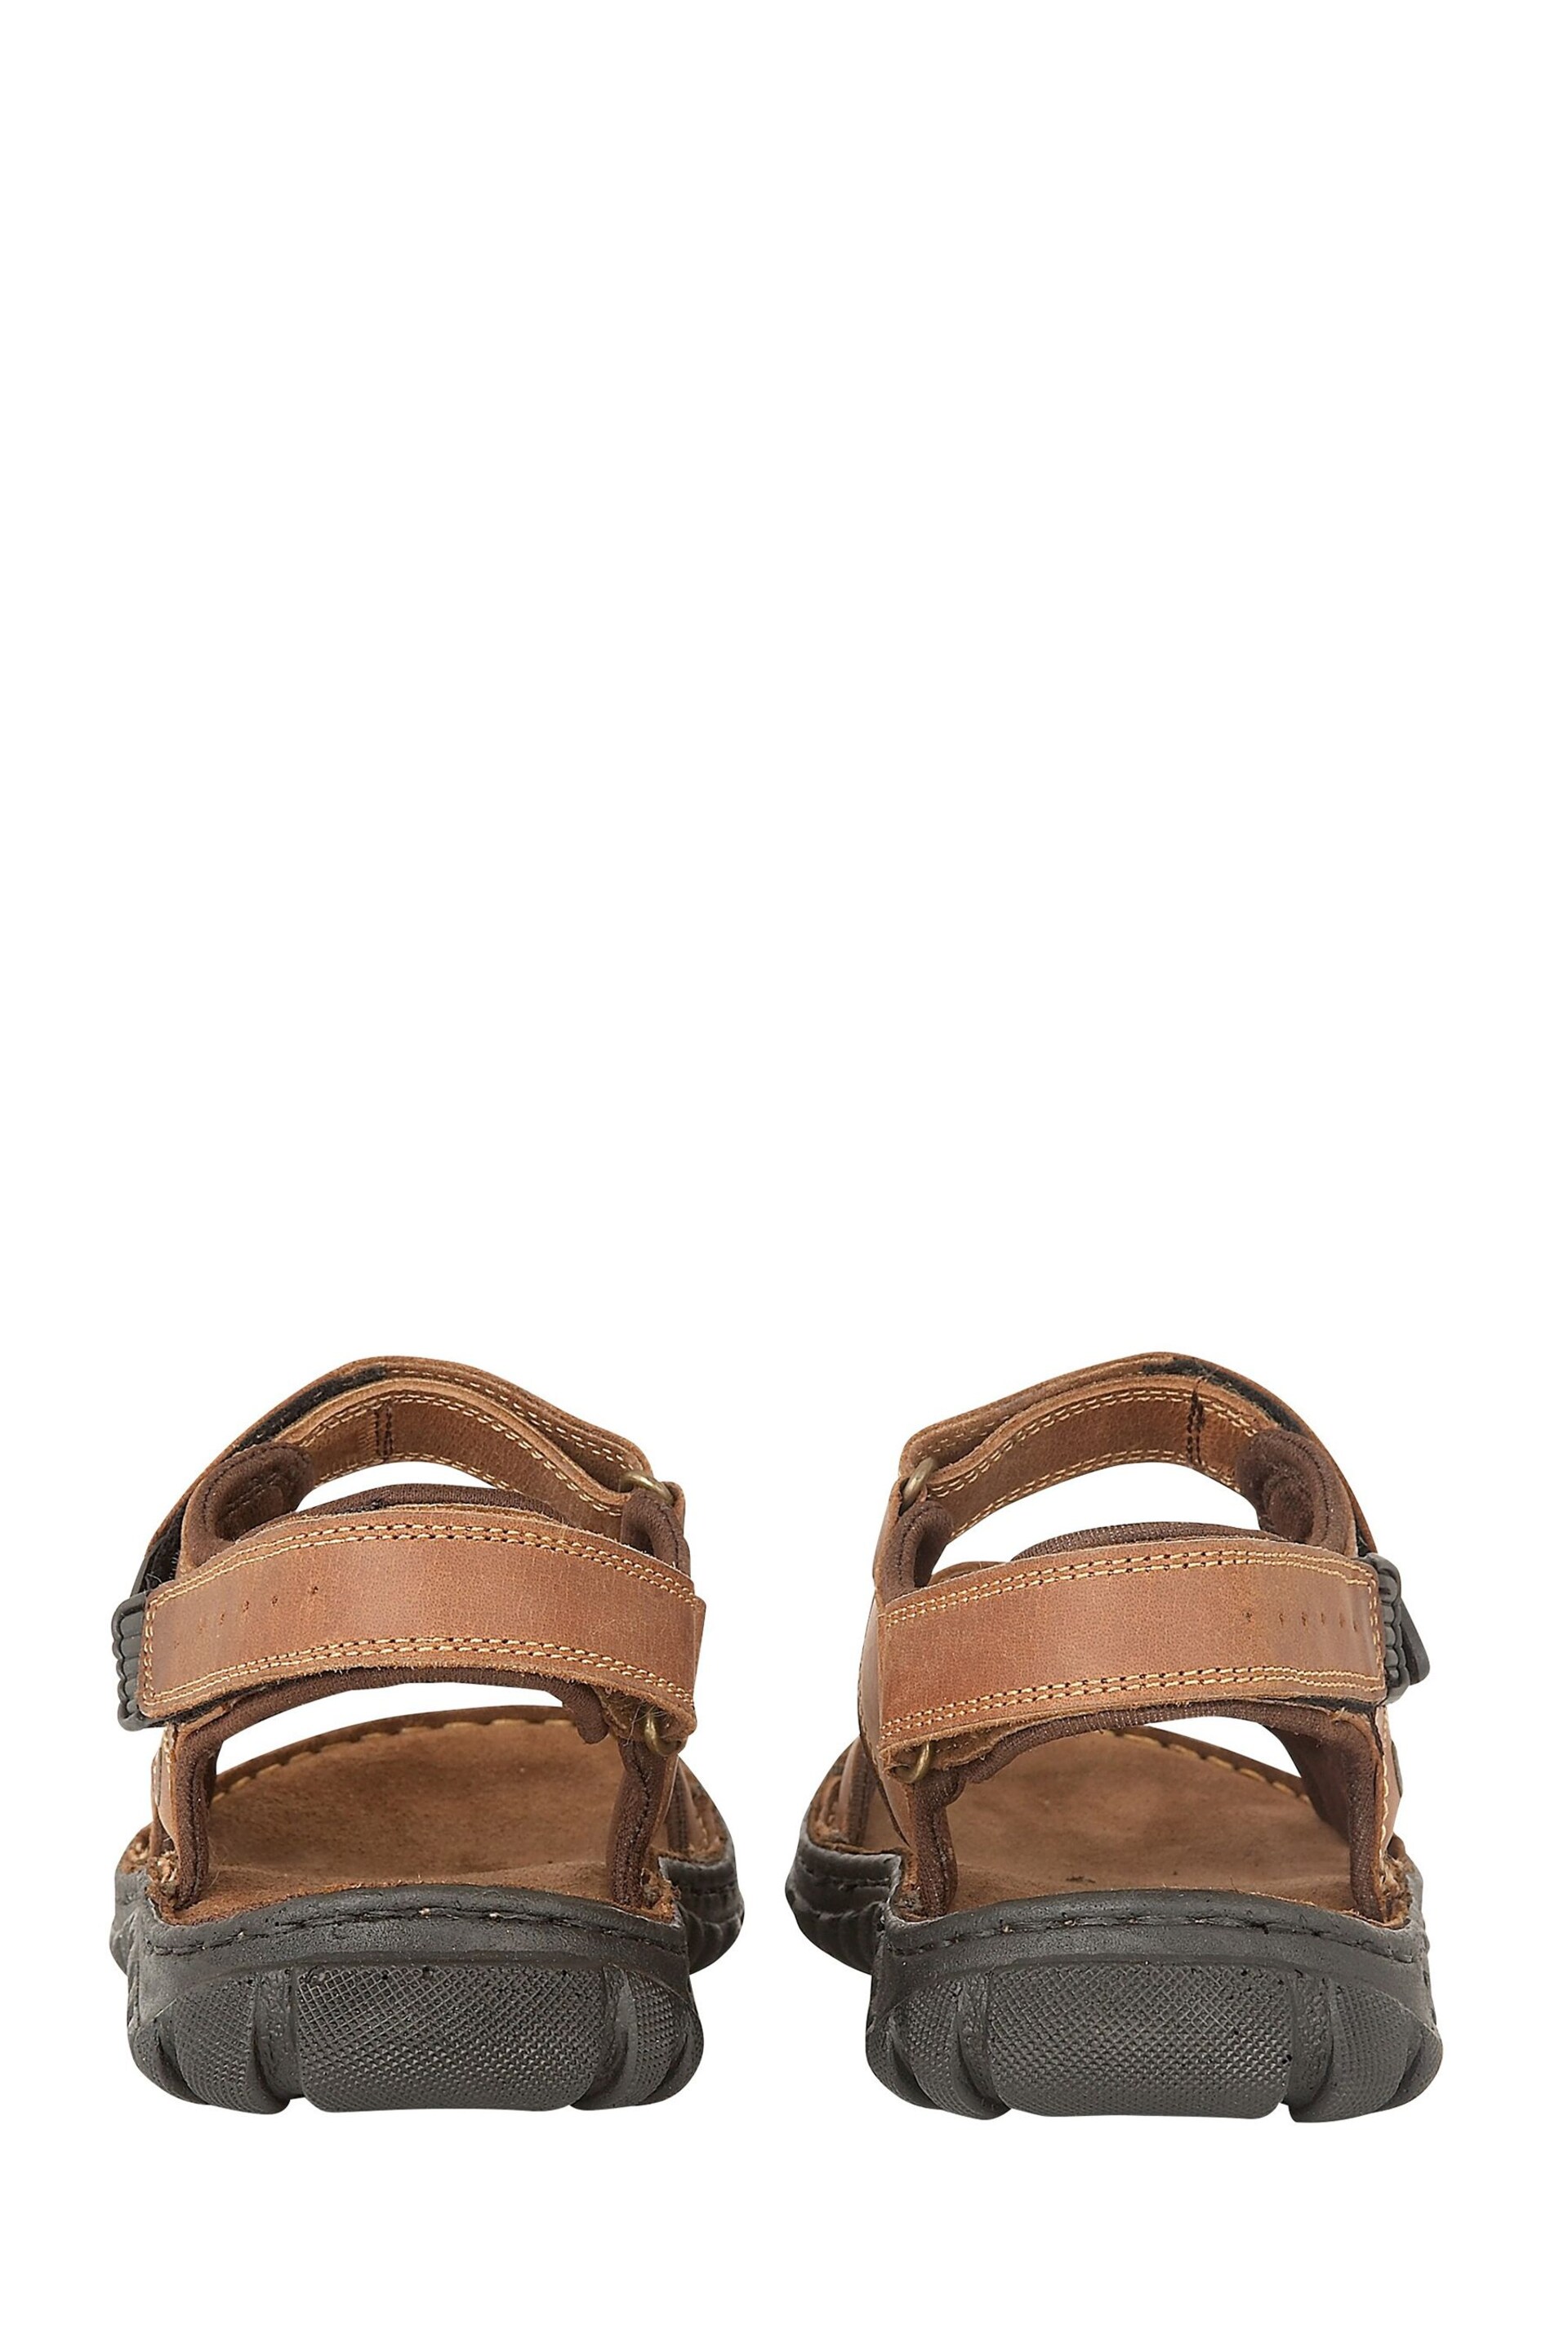 Lotus Brown Leather Open-Toe Sandals - Image 3 of 4